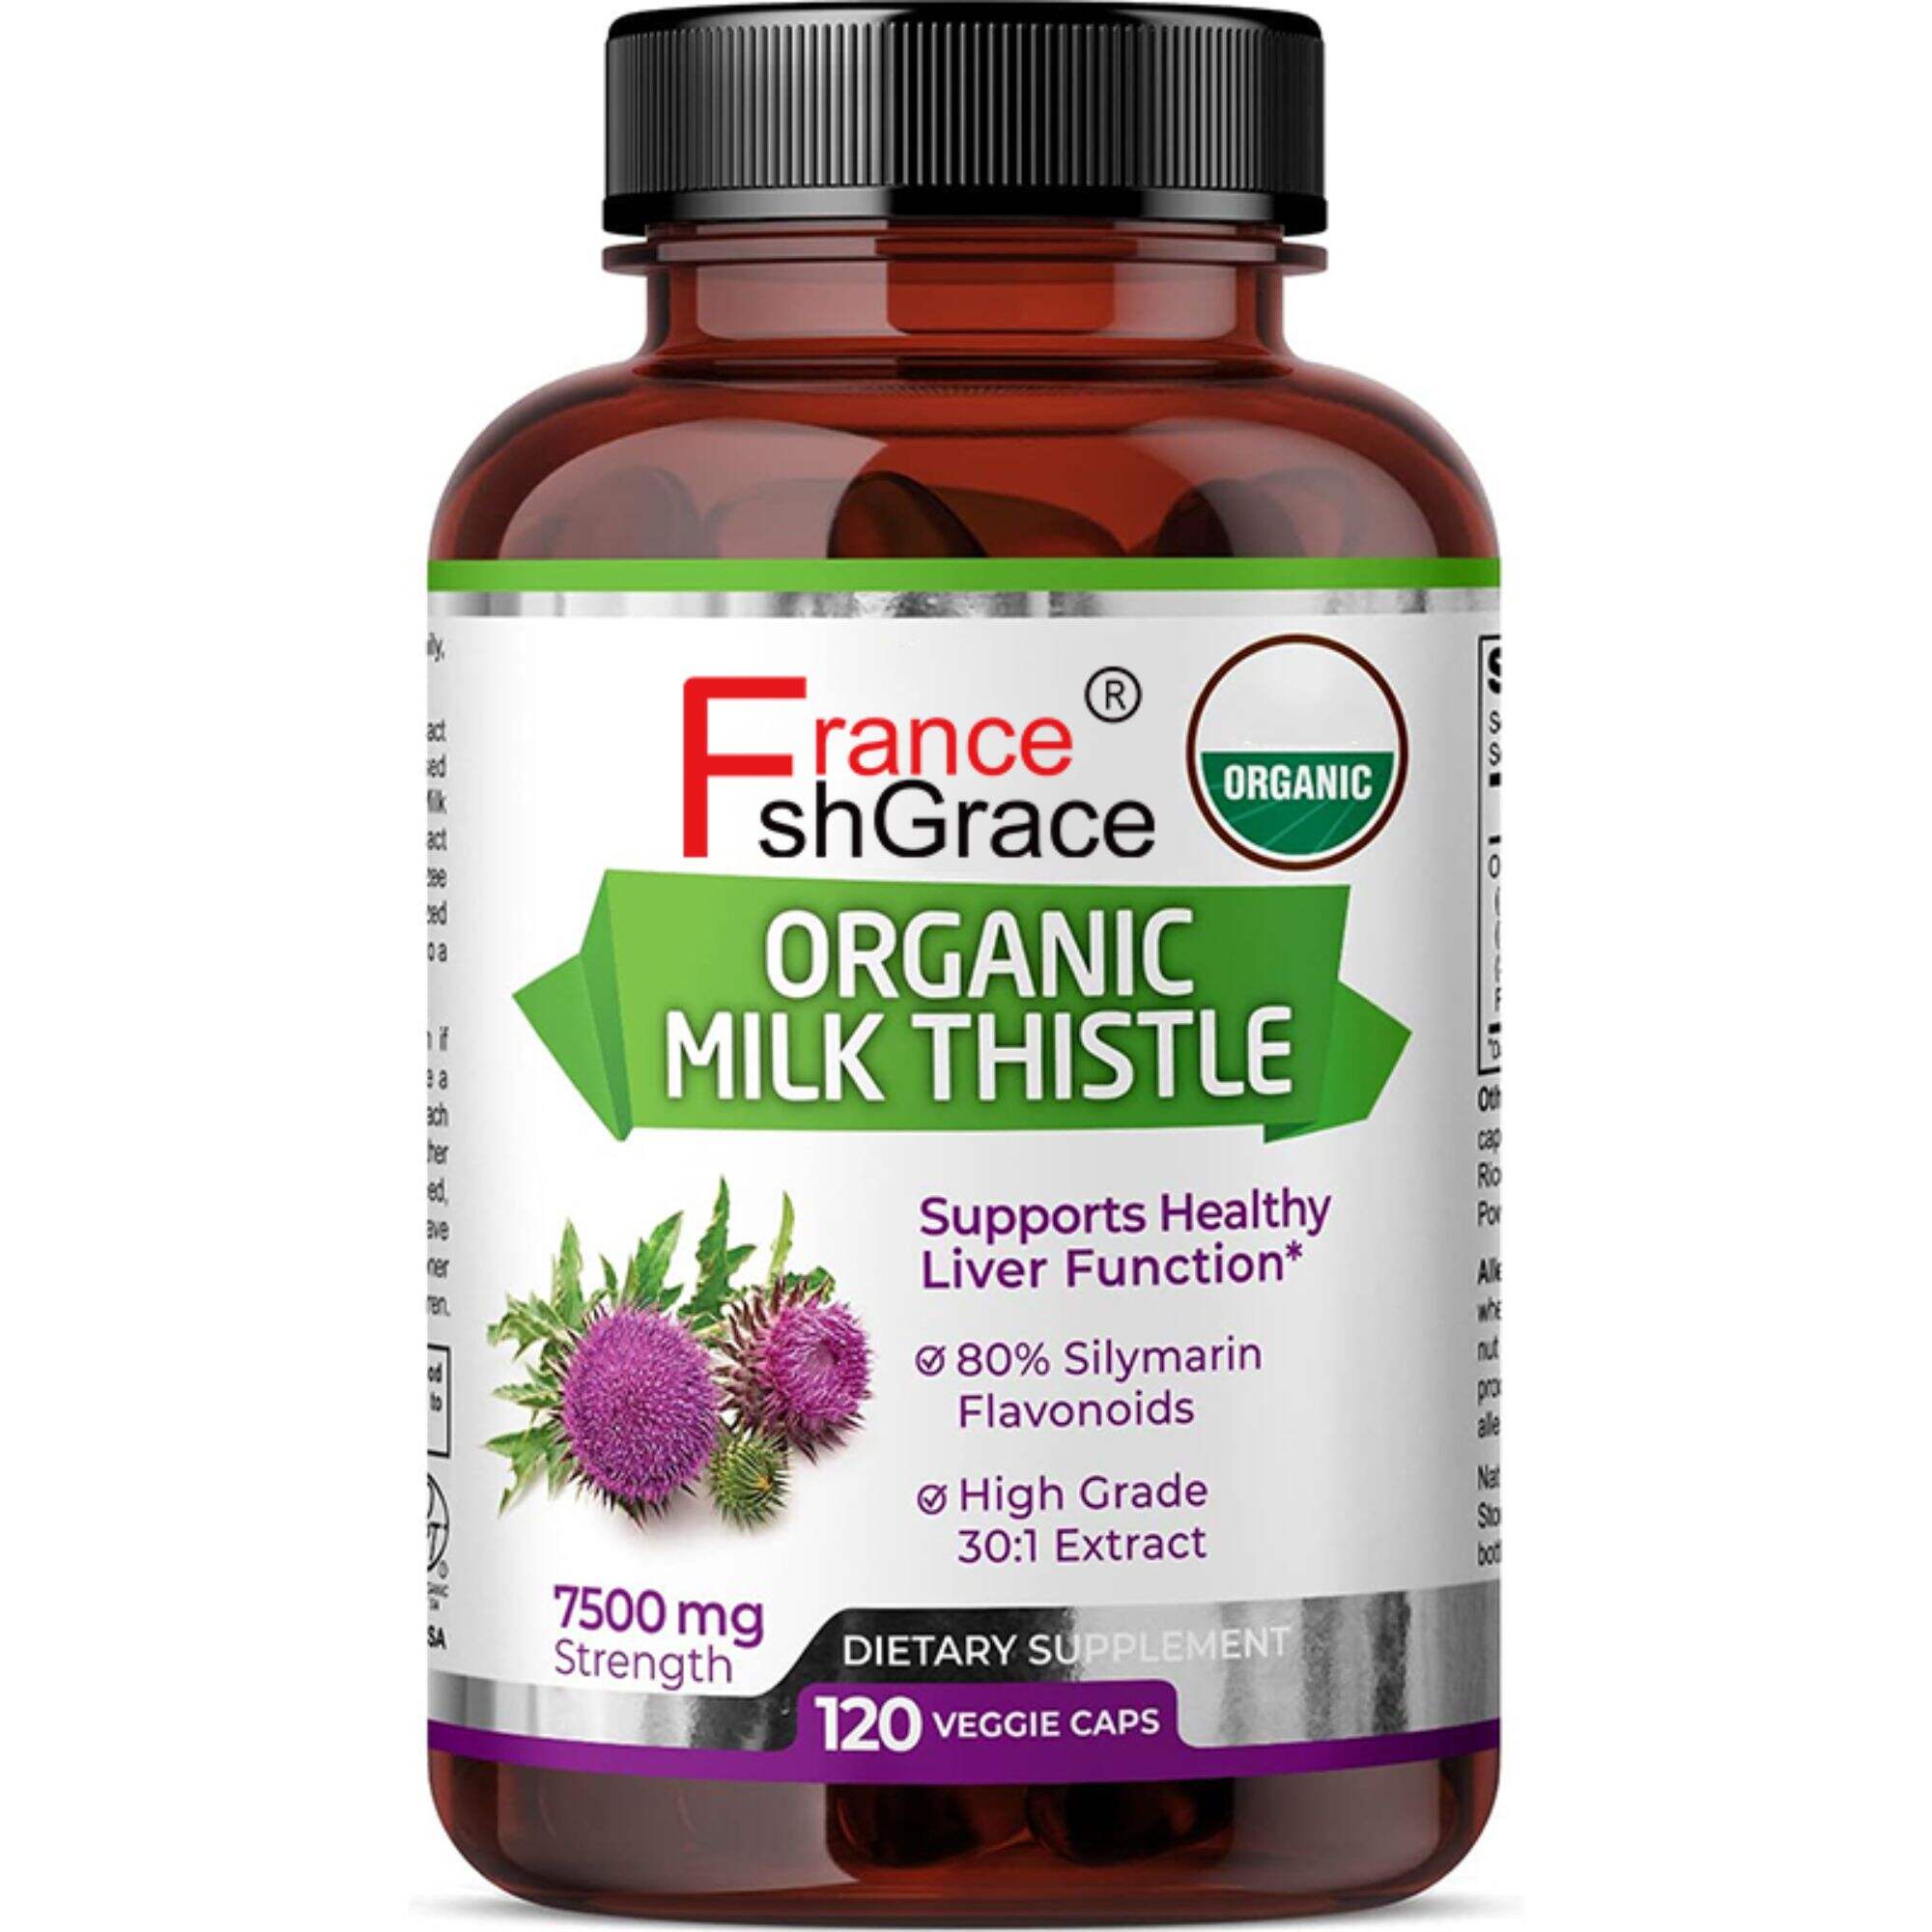 Organic Milk Thistle 30:1 Extract, 7500 mg Strength, 120 Vegan Capsules, 80% Silymarin Flavonoids, Standardized and Concentrated 30X Extract, 100% Vegetarian, All-Natural and Non-GMO